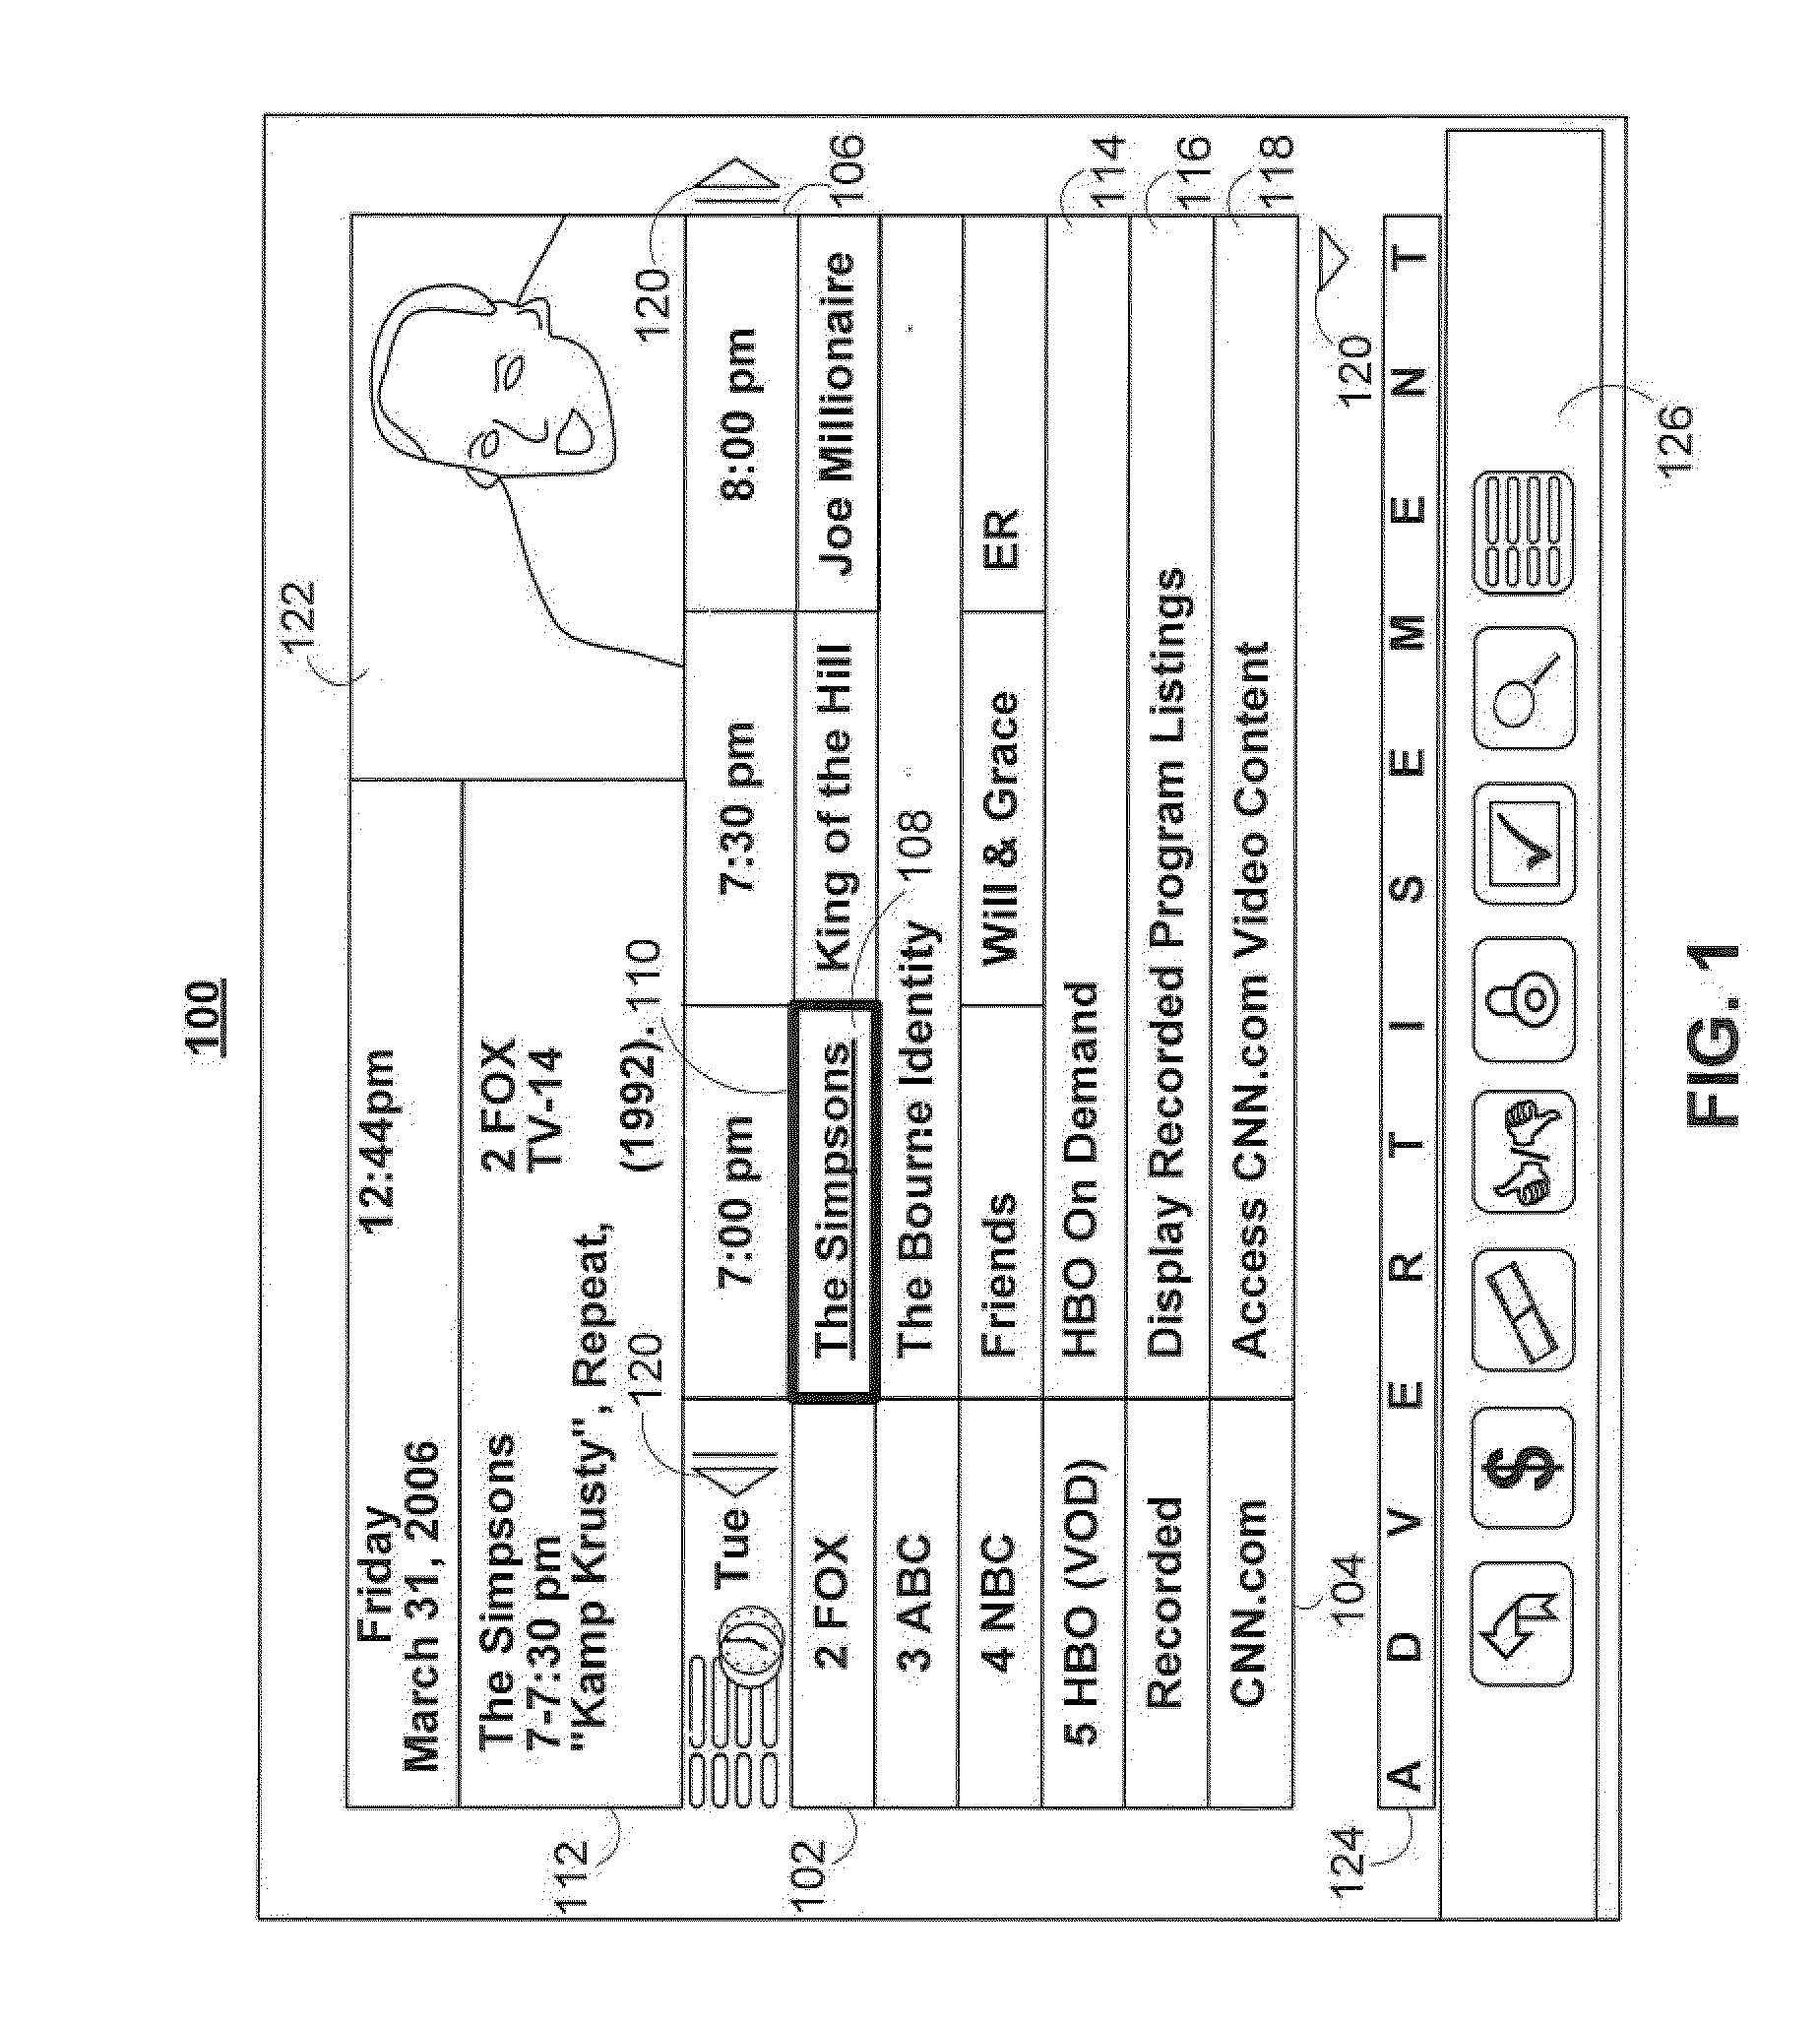 Systems and methods for providing reminders associated with detected users